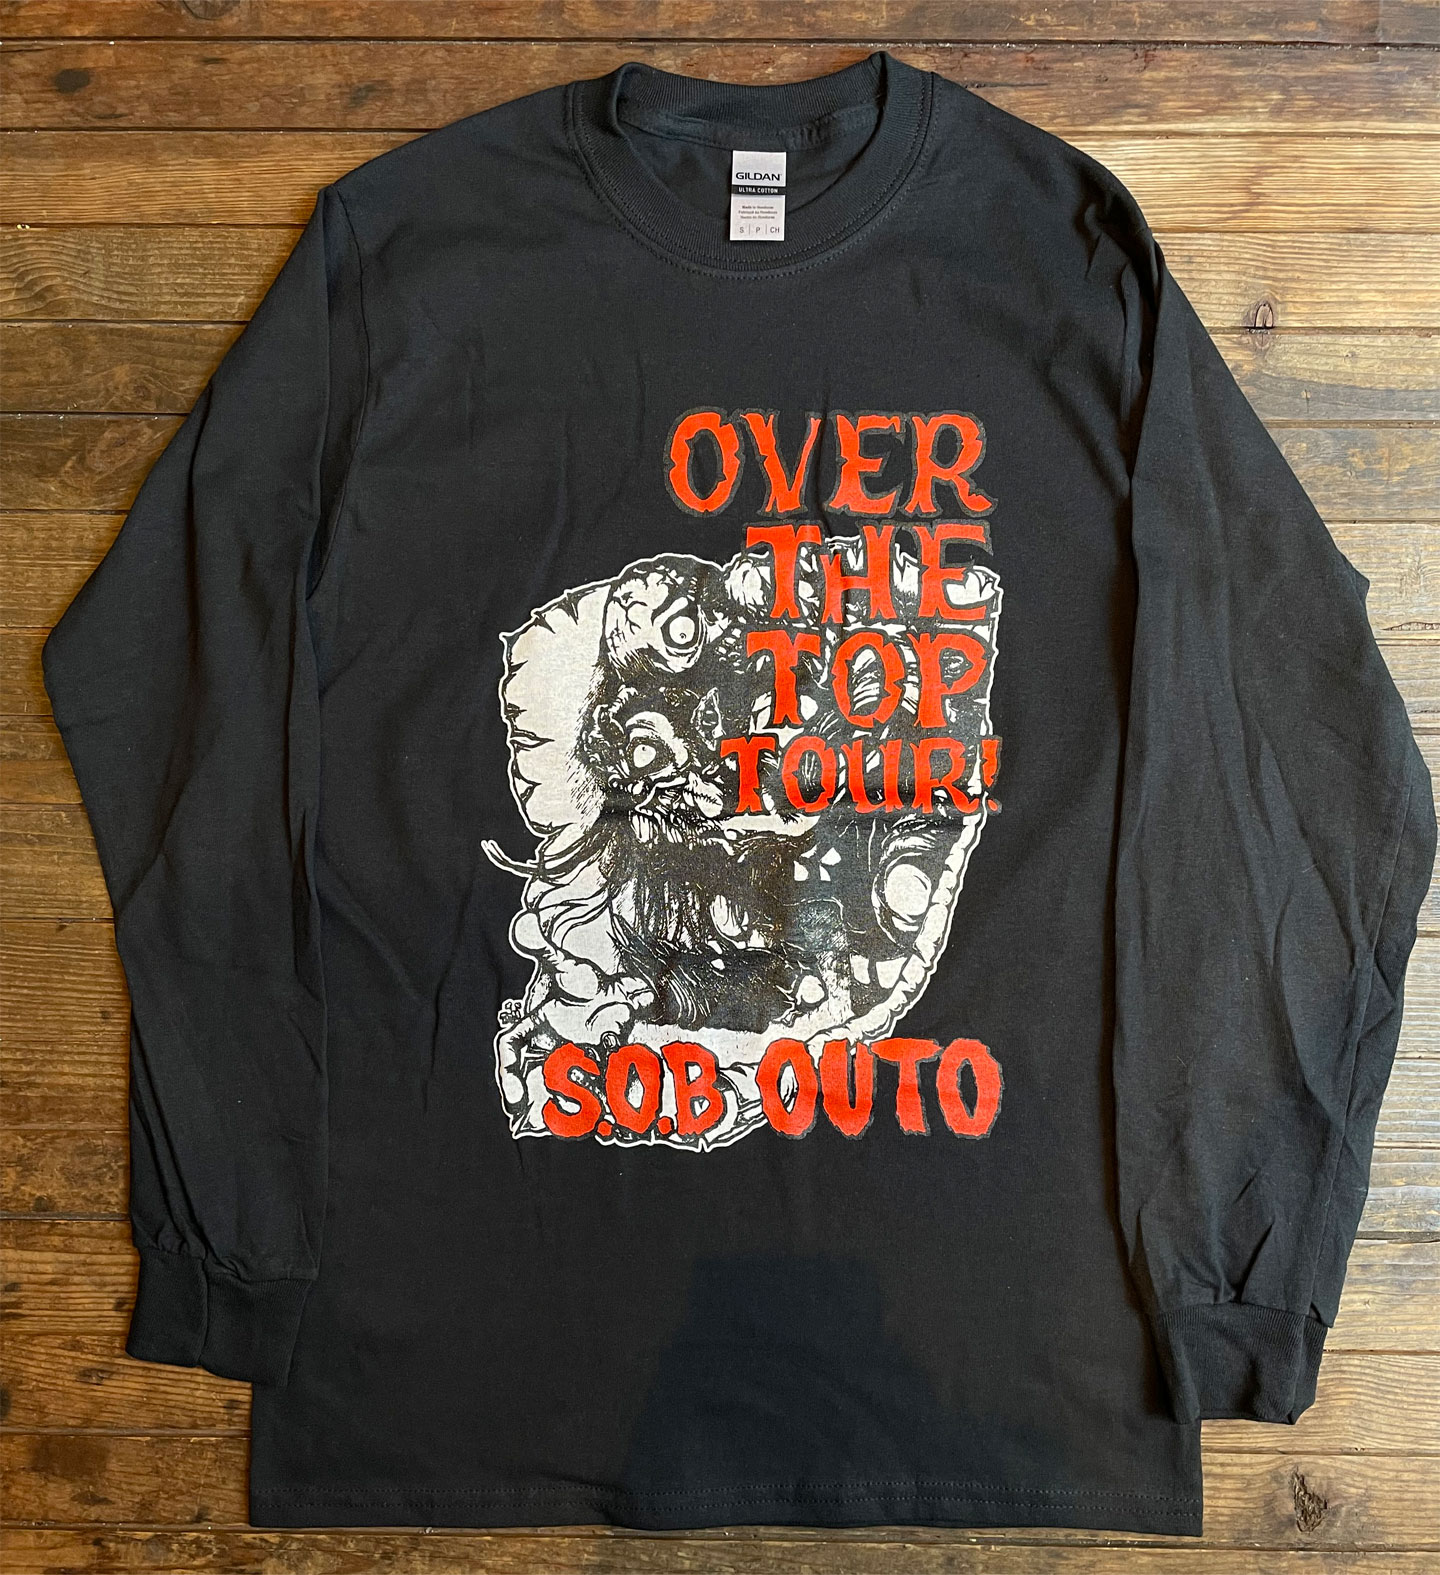 S.O.B x OUTO ロングスリーブTシャツ OVER THE TOP TOUR